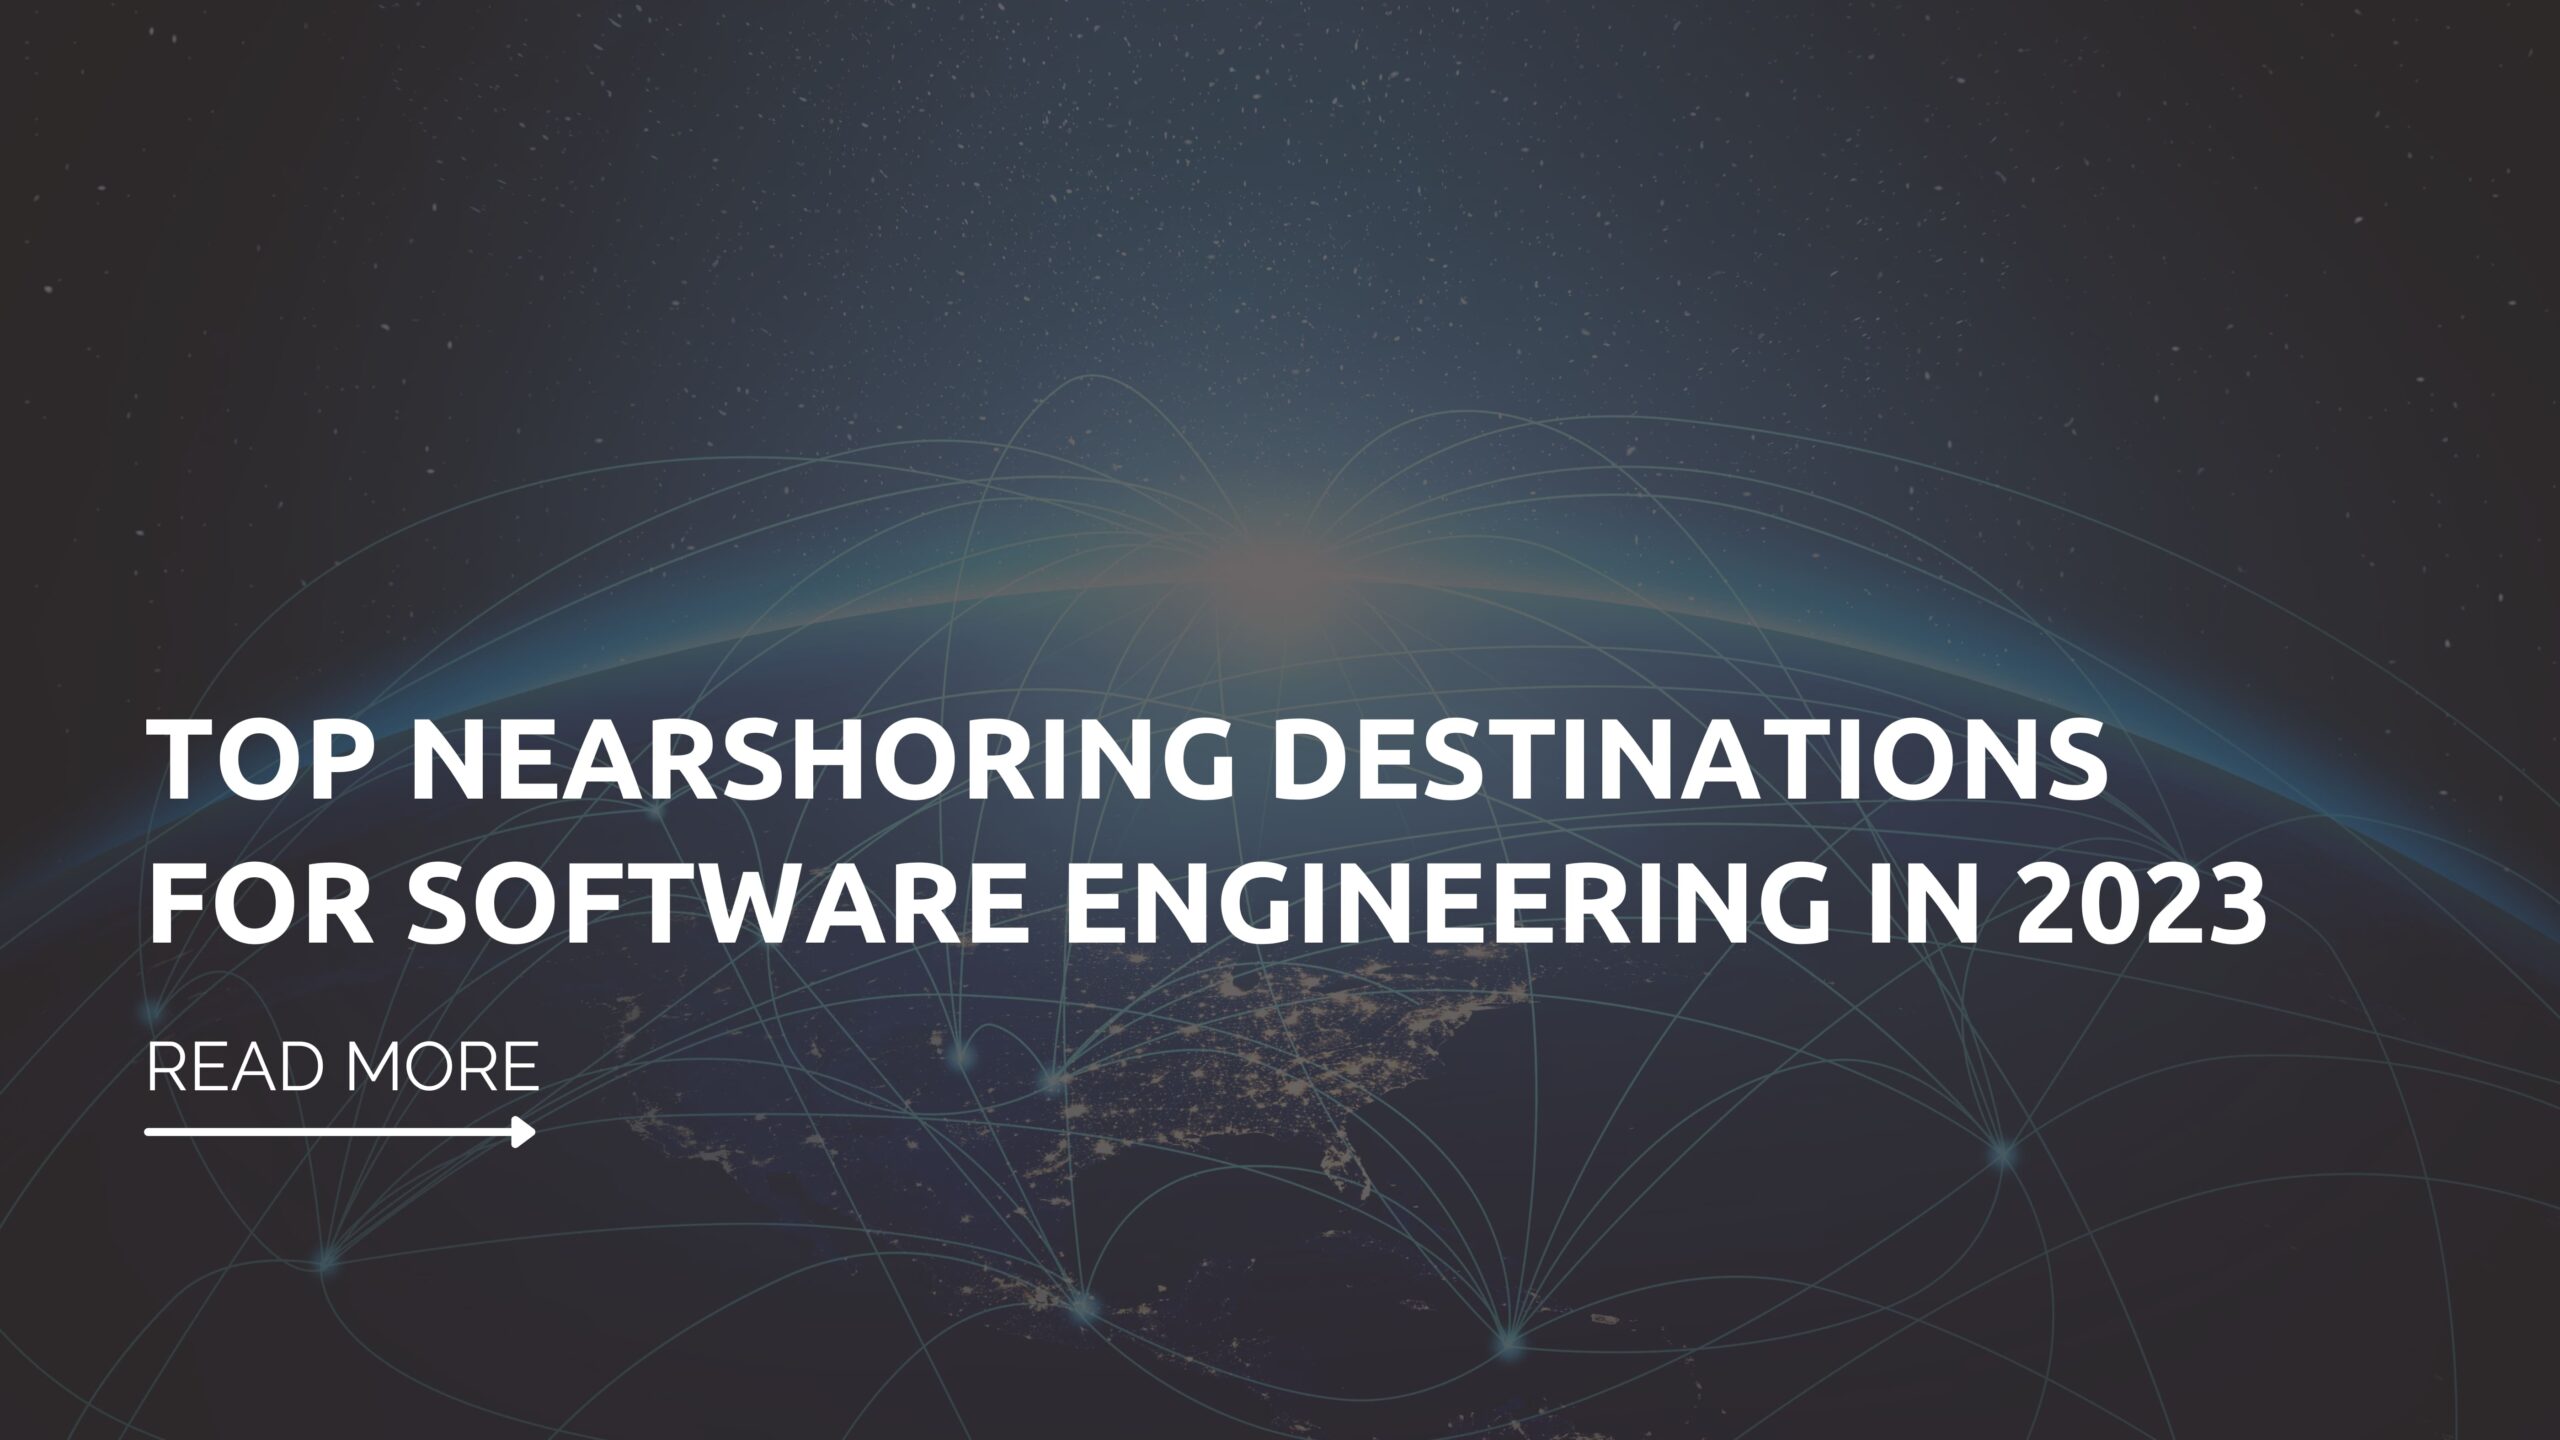 Top Mexico Nearshoring destinations for software engineering 2023